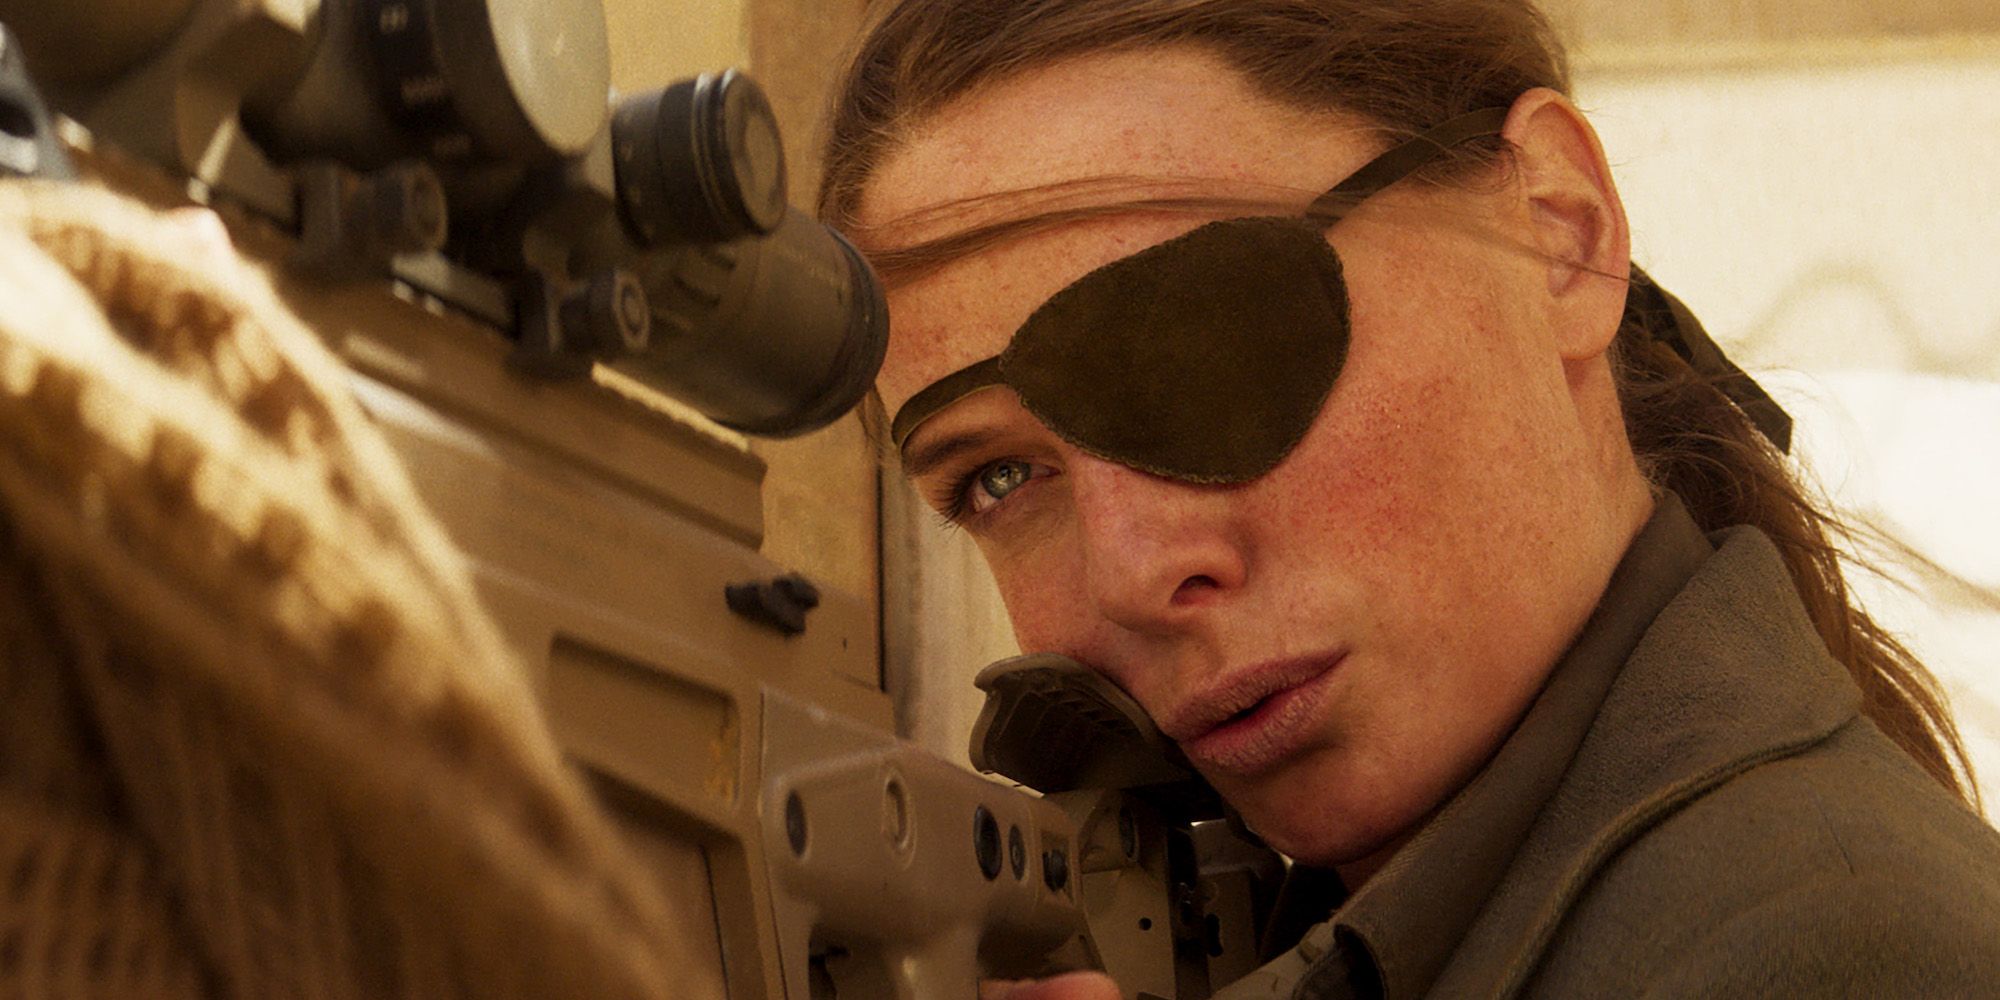 Ilsa wearing an eye patch and looking through a scope in Mission Impossible Dead Reckoning